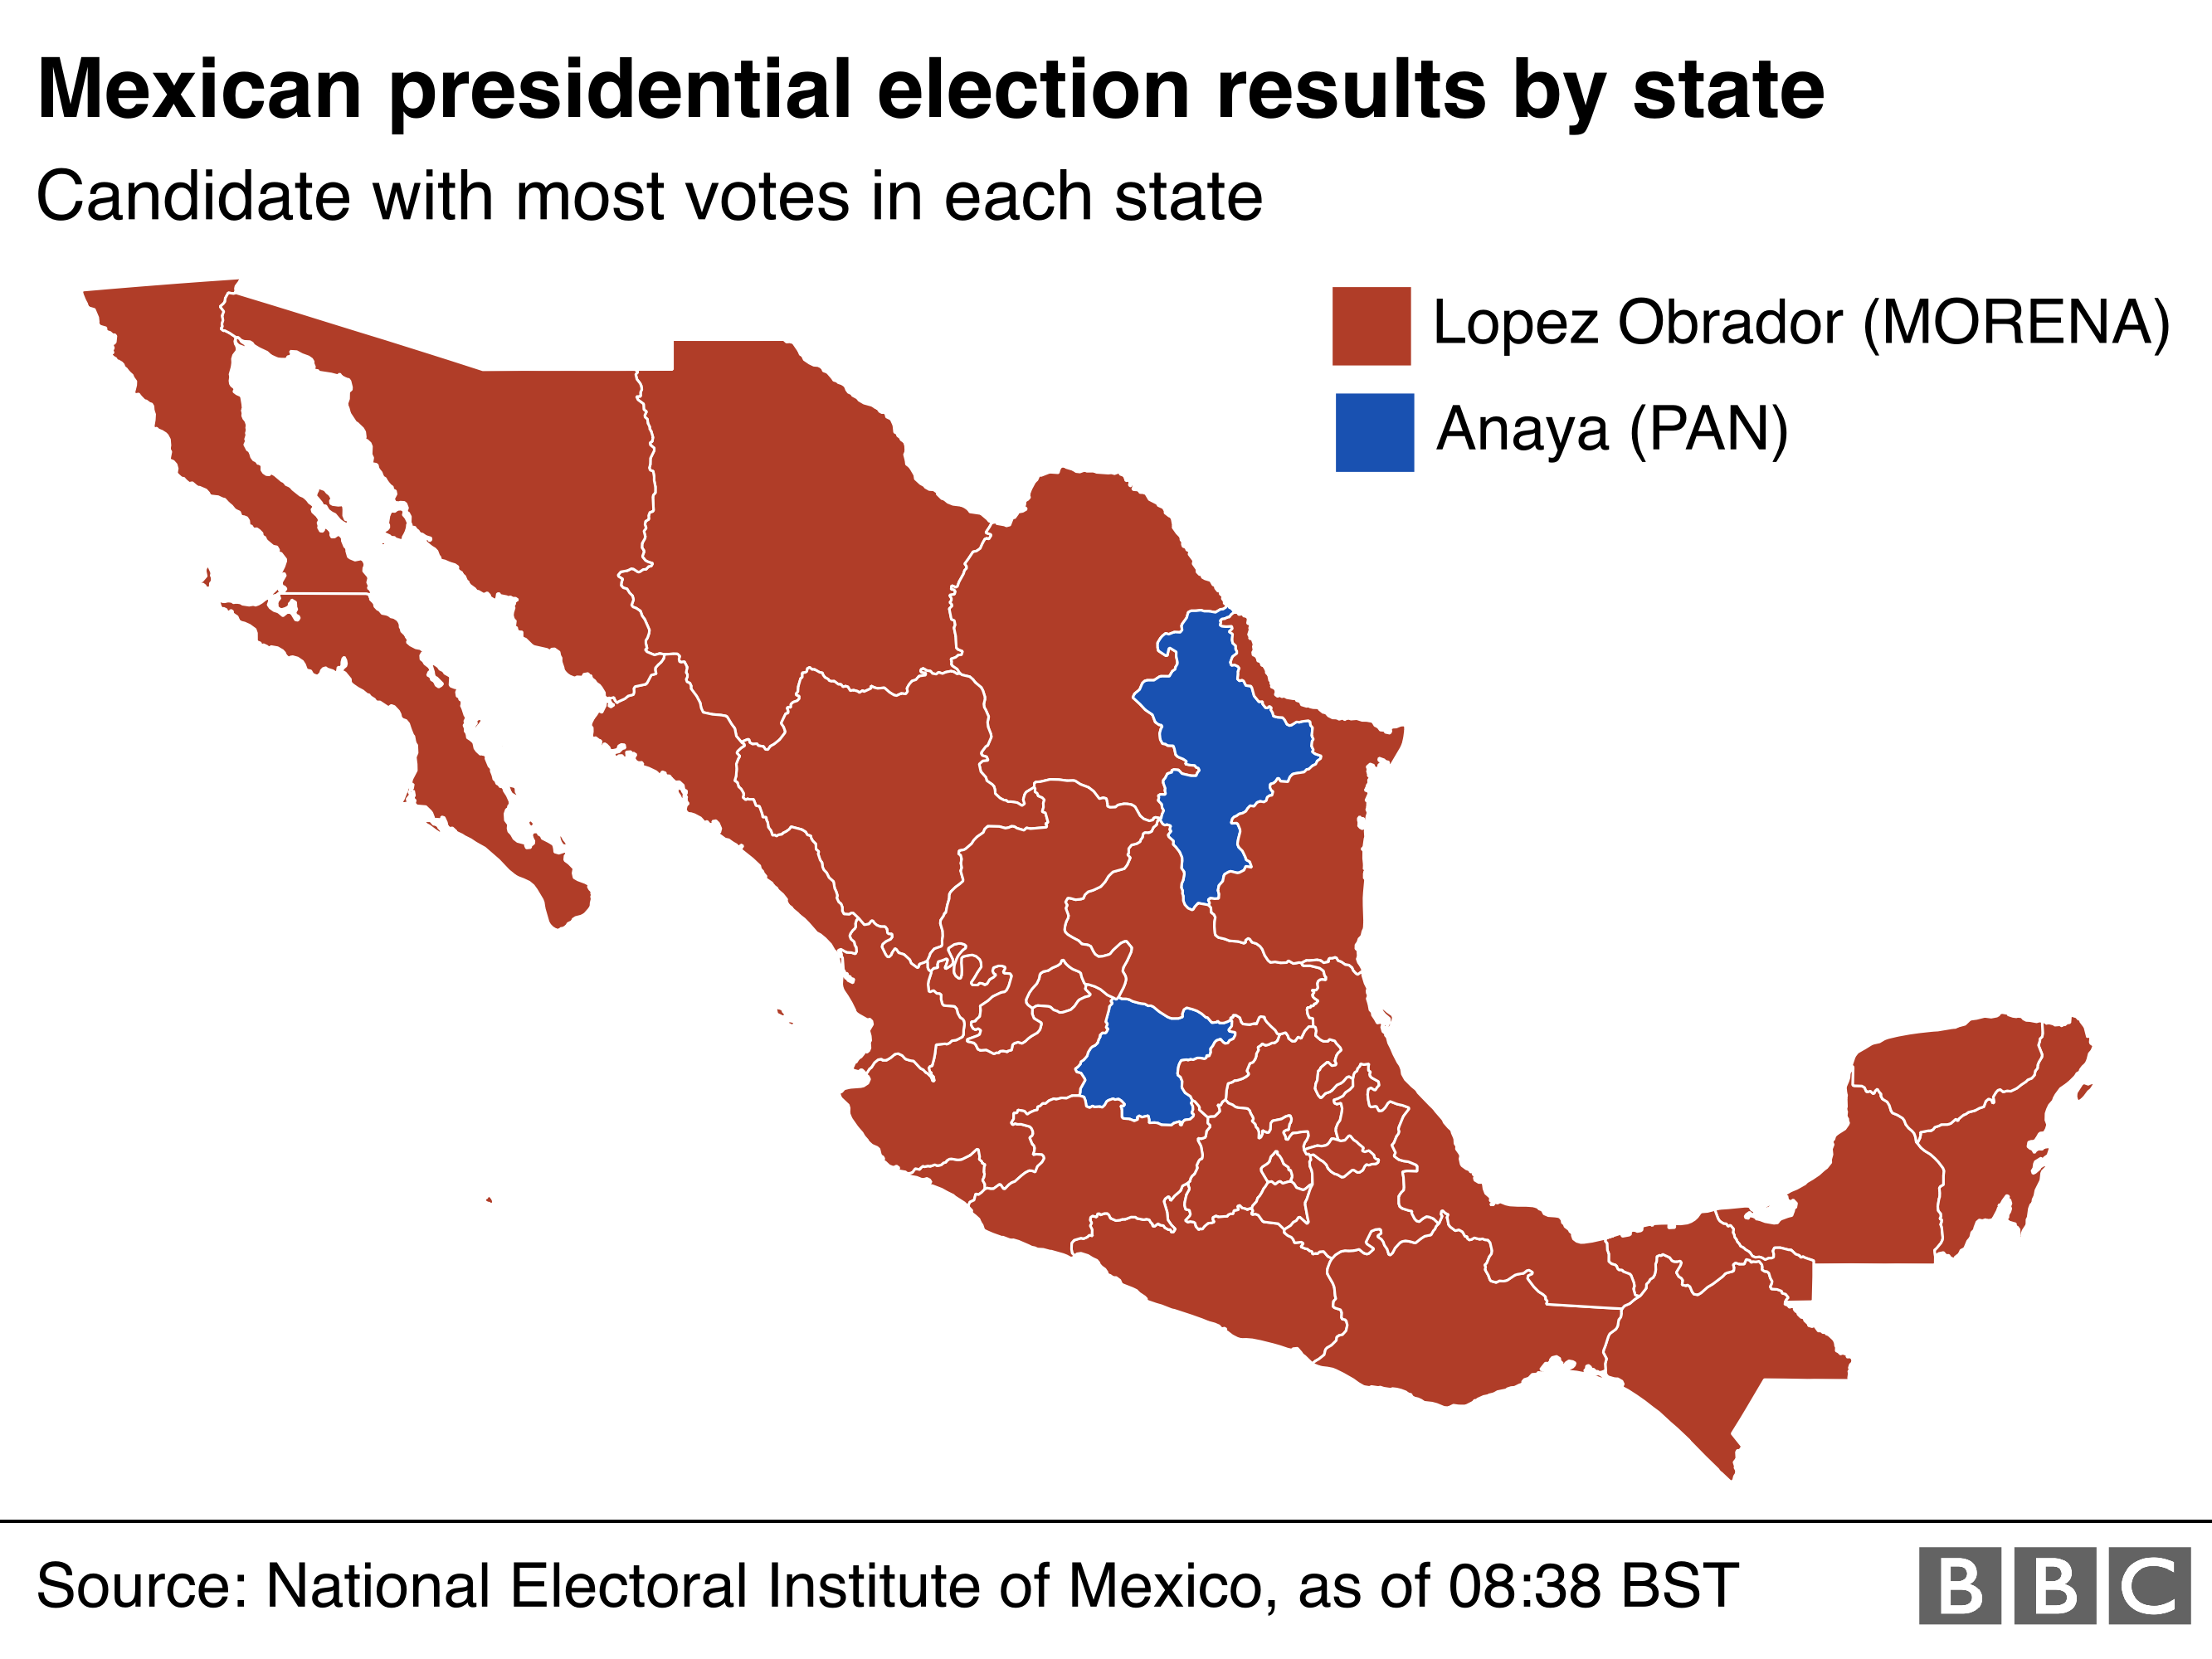 Lopez Obrador got the most votes in all but two states